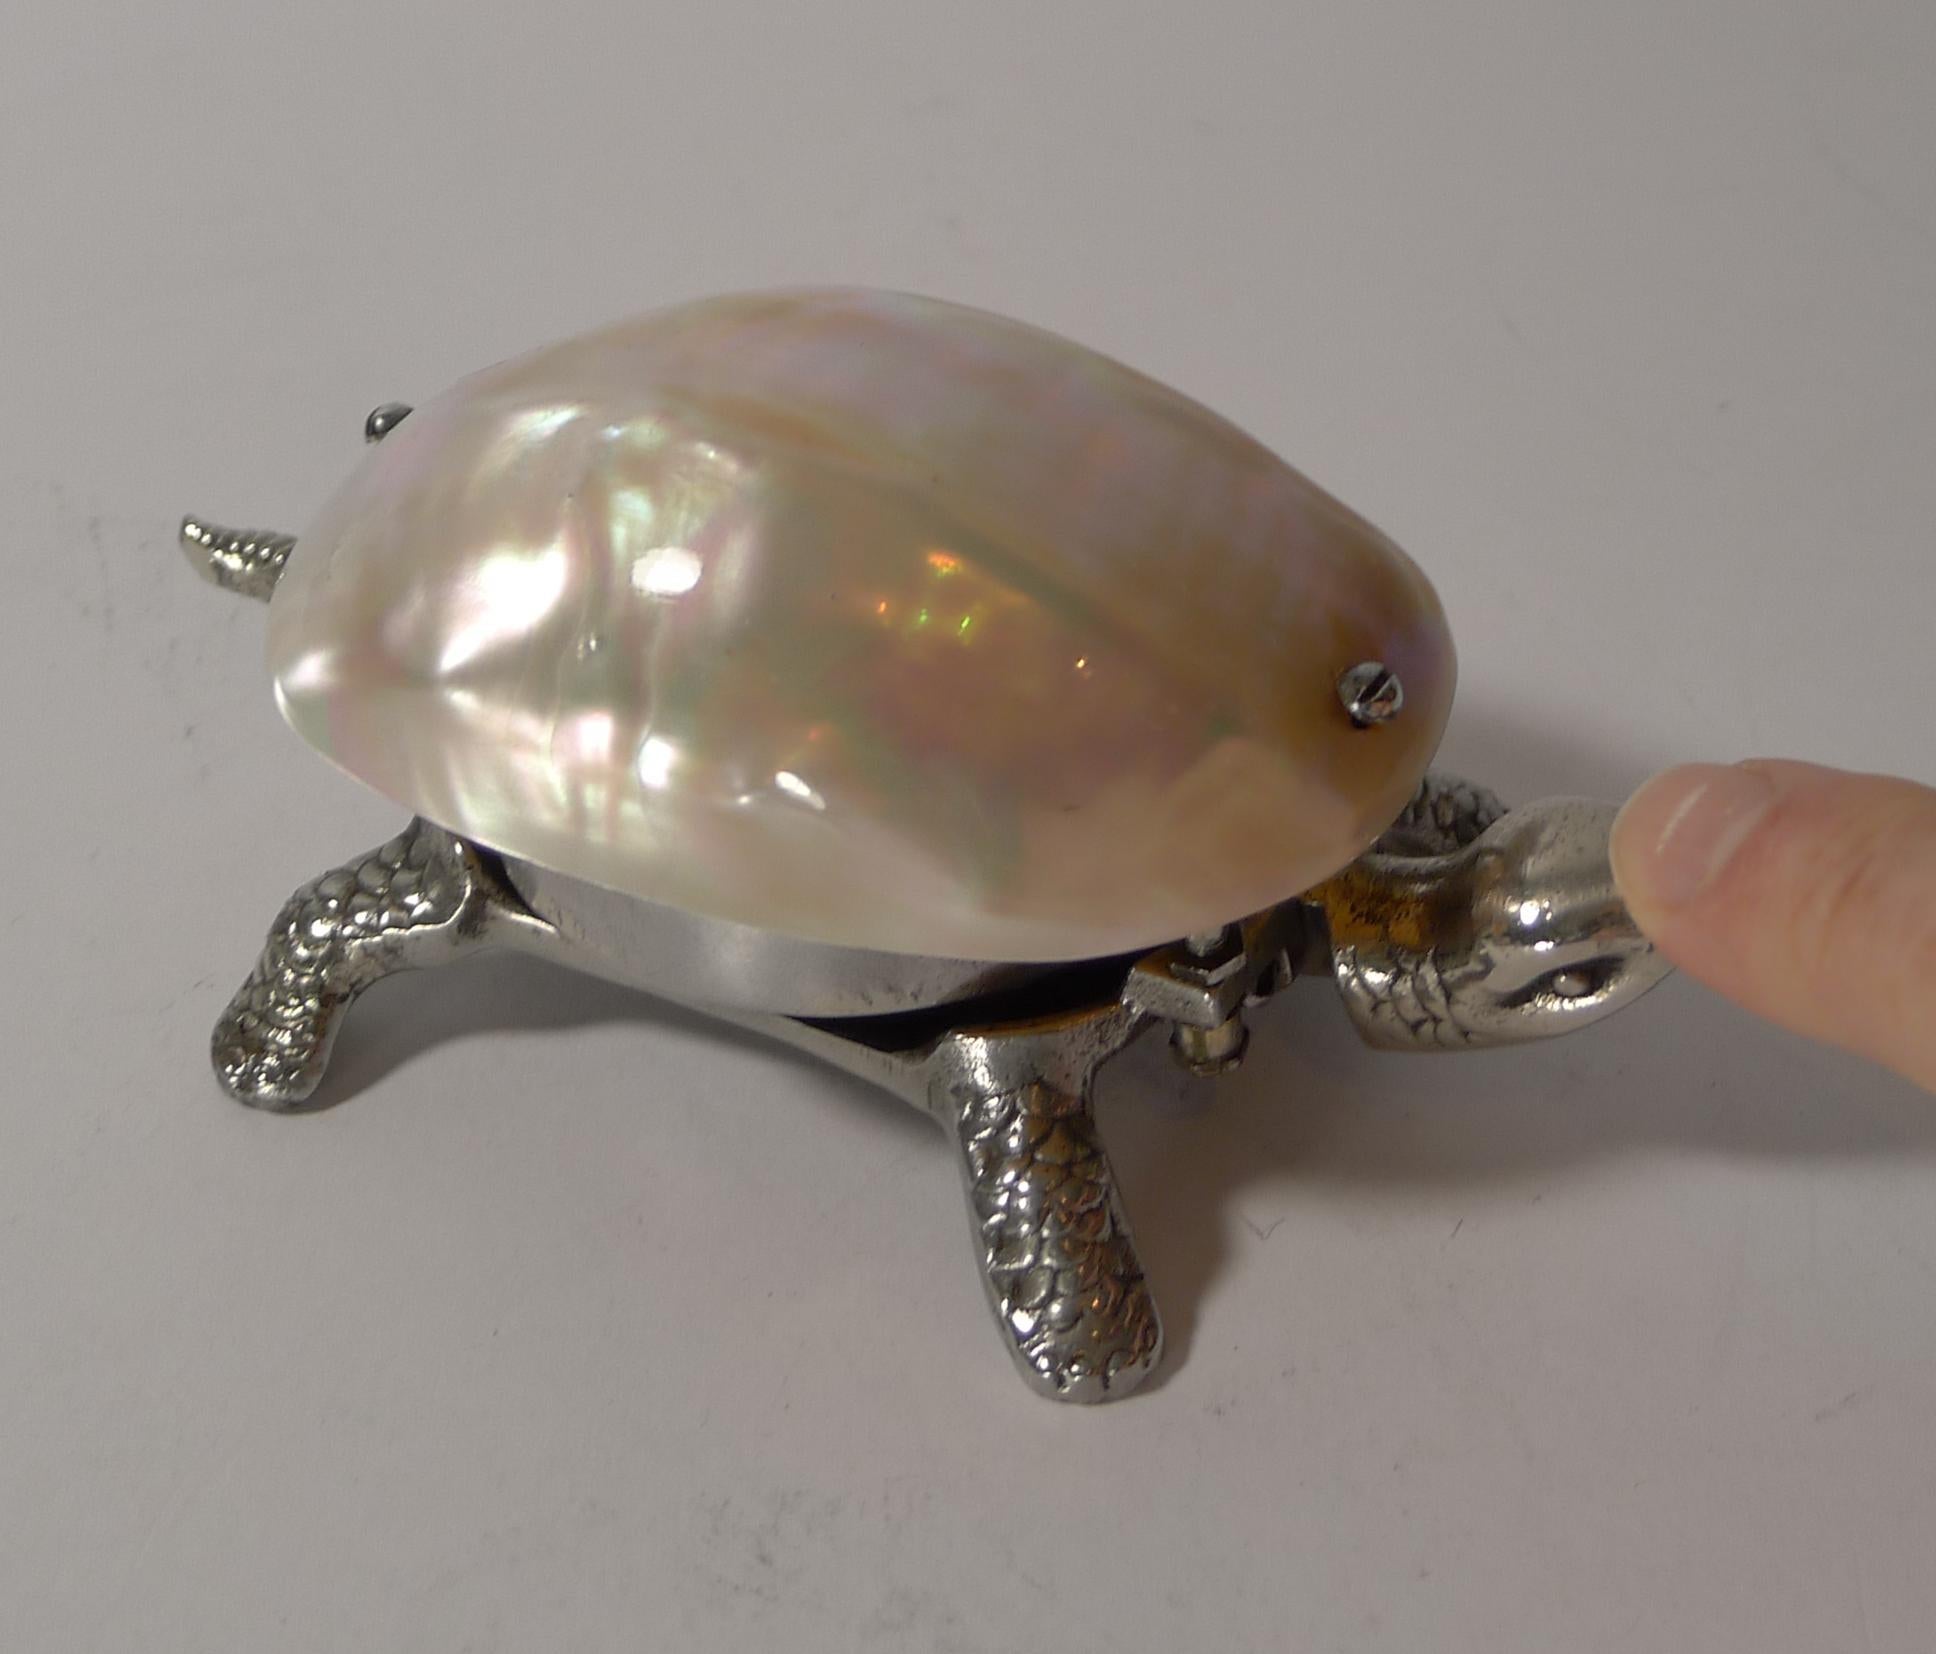 A fabulous and rare example of a novelty German mechanical bell made from a silver coloured metal in the form of the most charming tortoise.

The bell is would from the underside and rung by pressing either his head or tail, in full working